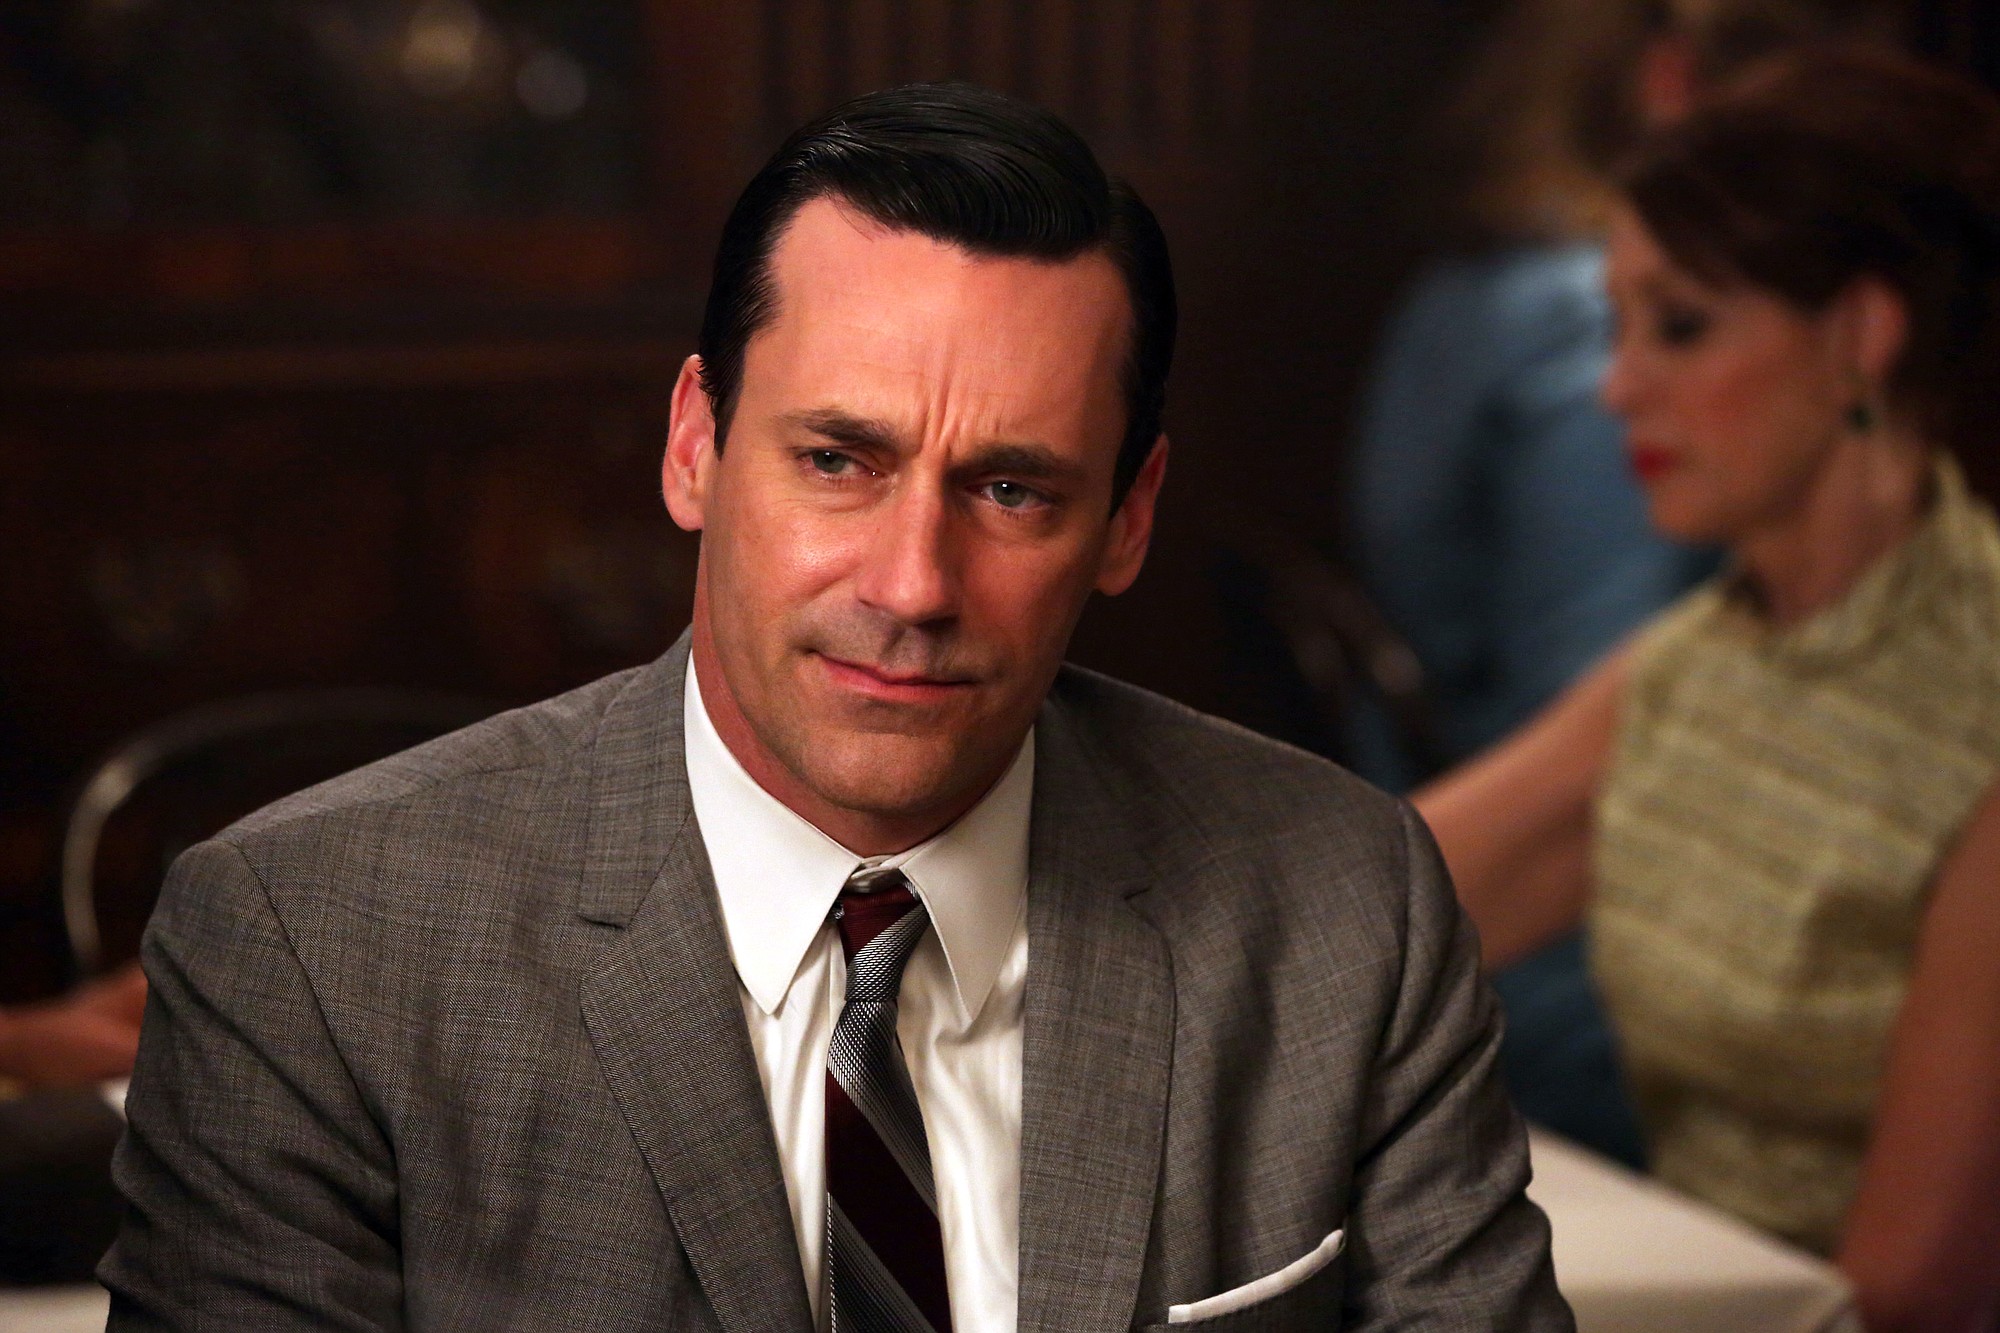 AMC
Jon Hamm as Don Draper in a scene from &quot;Mad Men.&quot; The series' final season begins April 5.